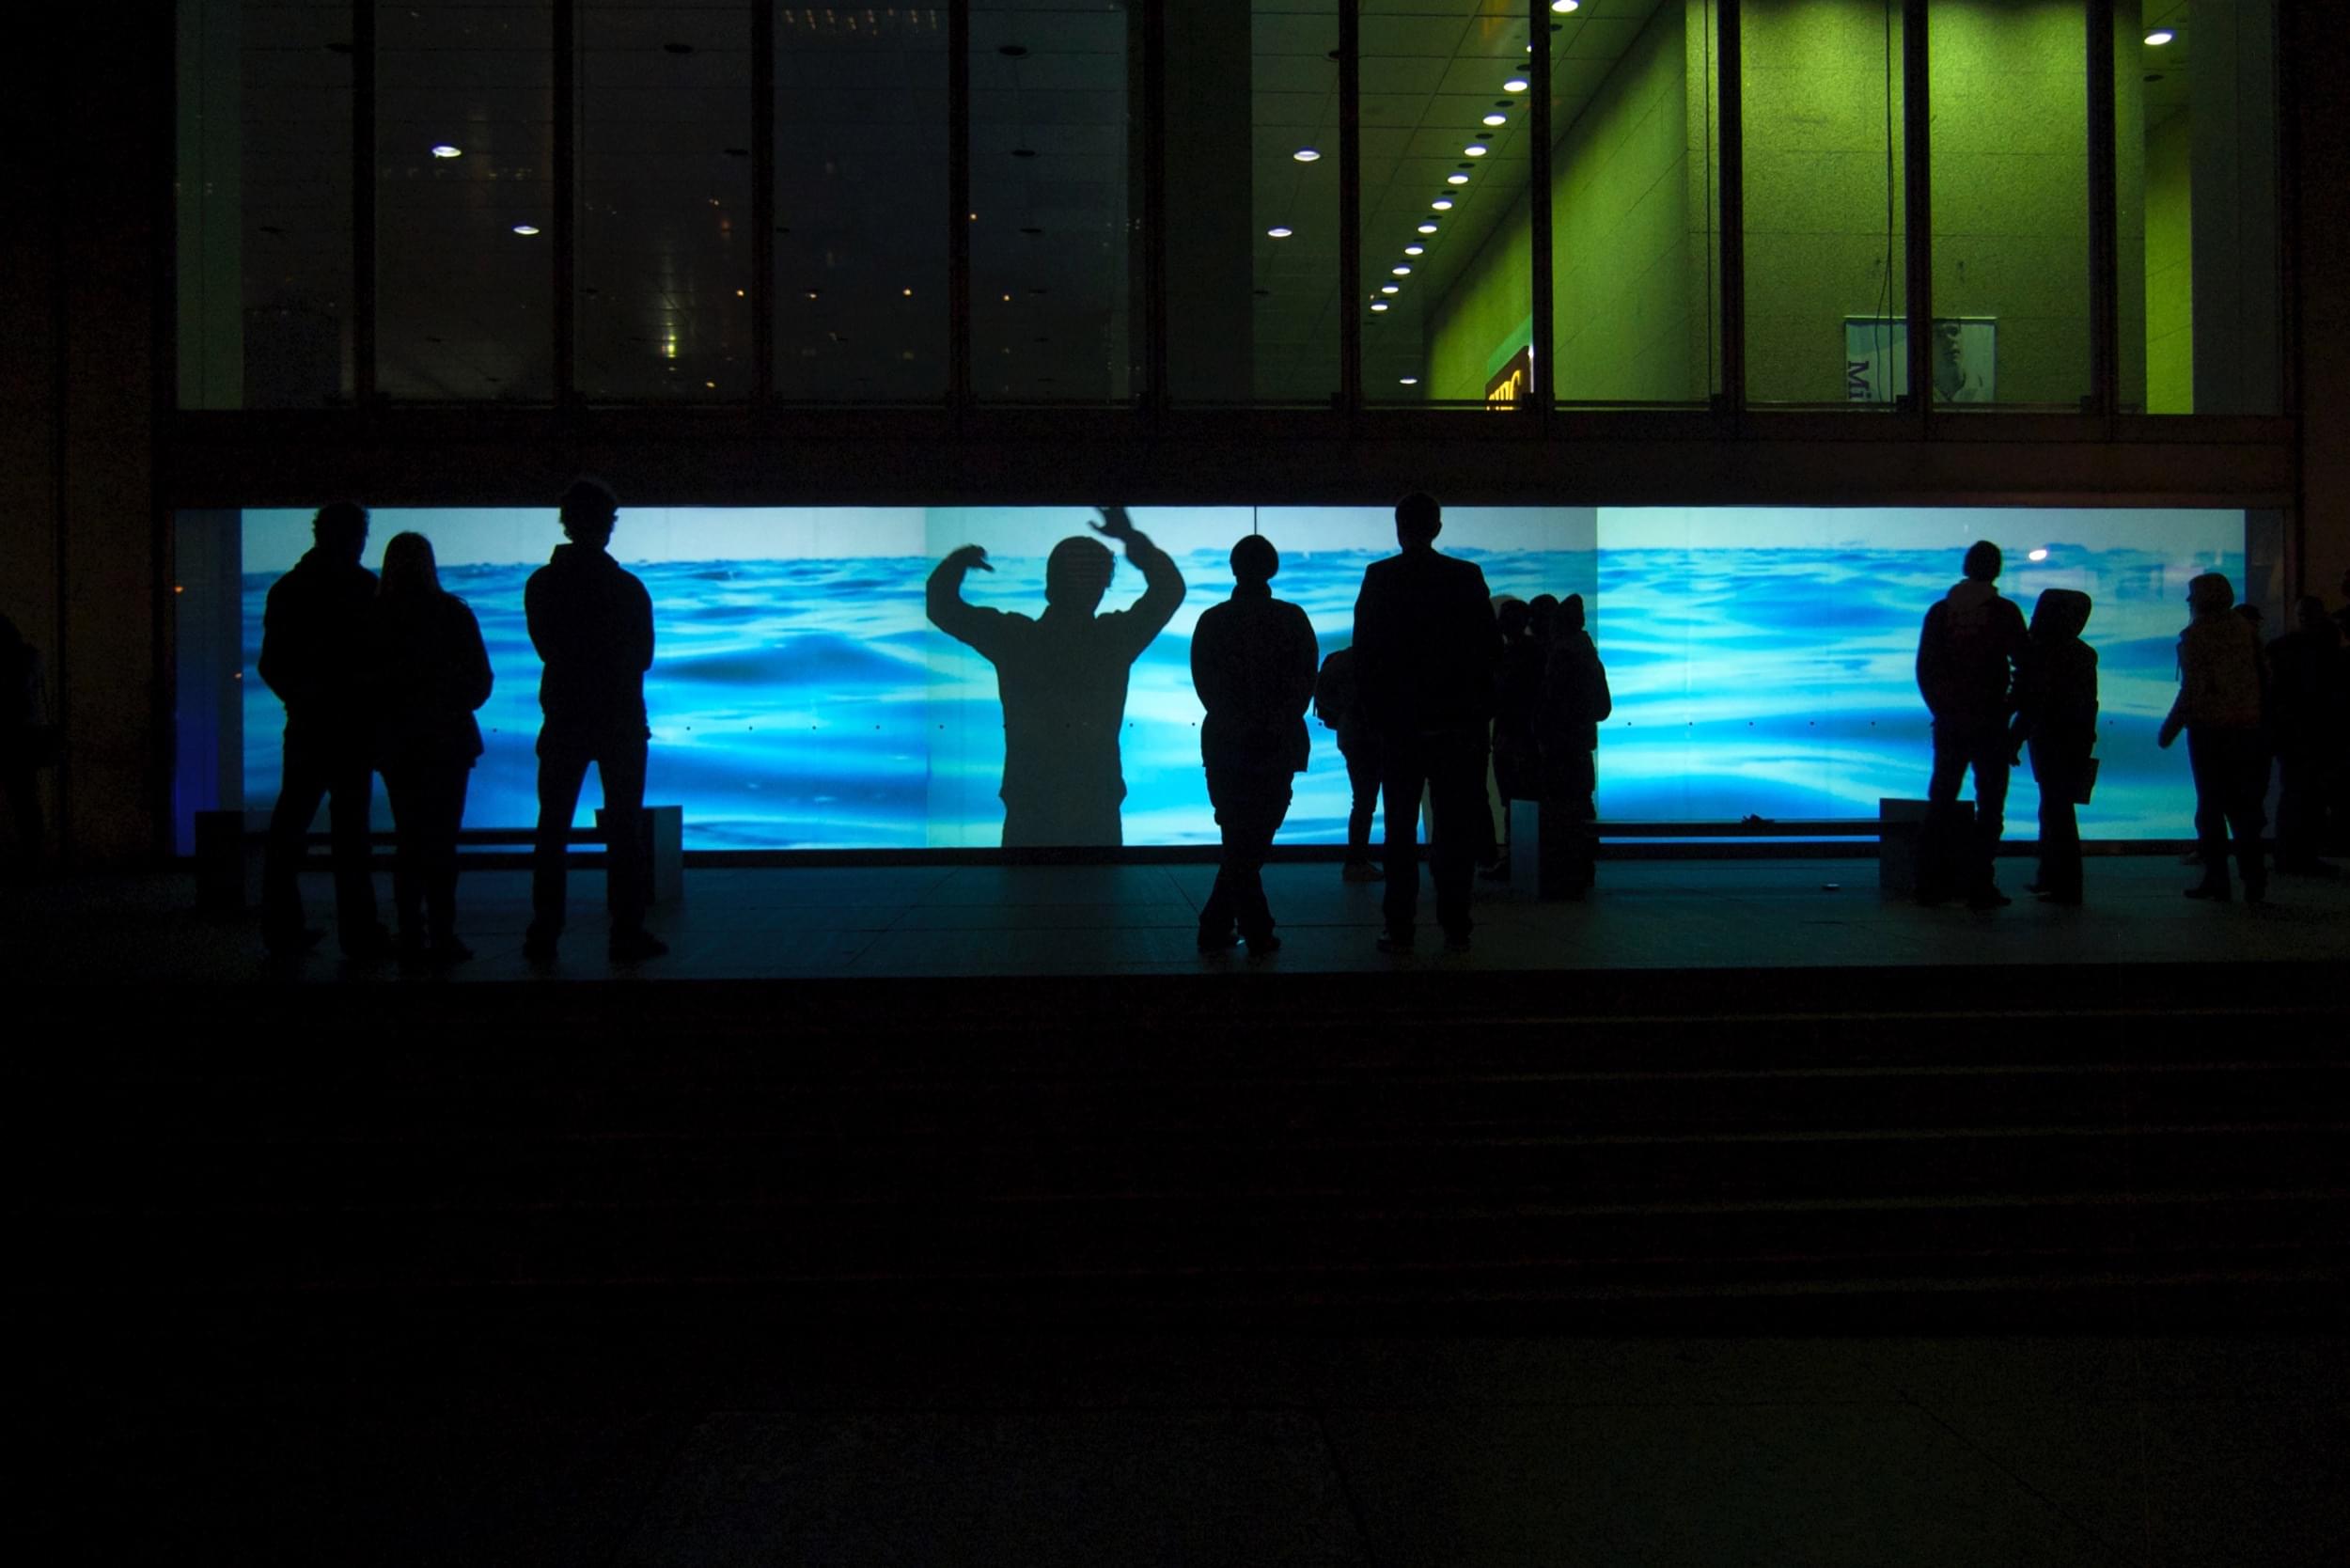 Small thumbnail image of Nighttime photograph of about a dozen people, all with their backs to the camera, looking at the projected image of a body of water in front of them. In the middle of the projected image is a large silhouette of a figure performing a dance maneuver, which is quite striking if you ask me.